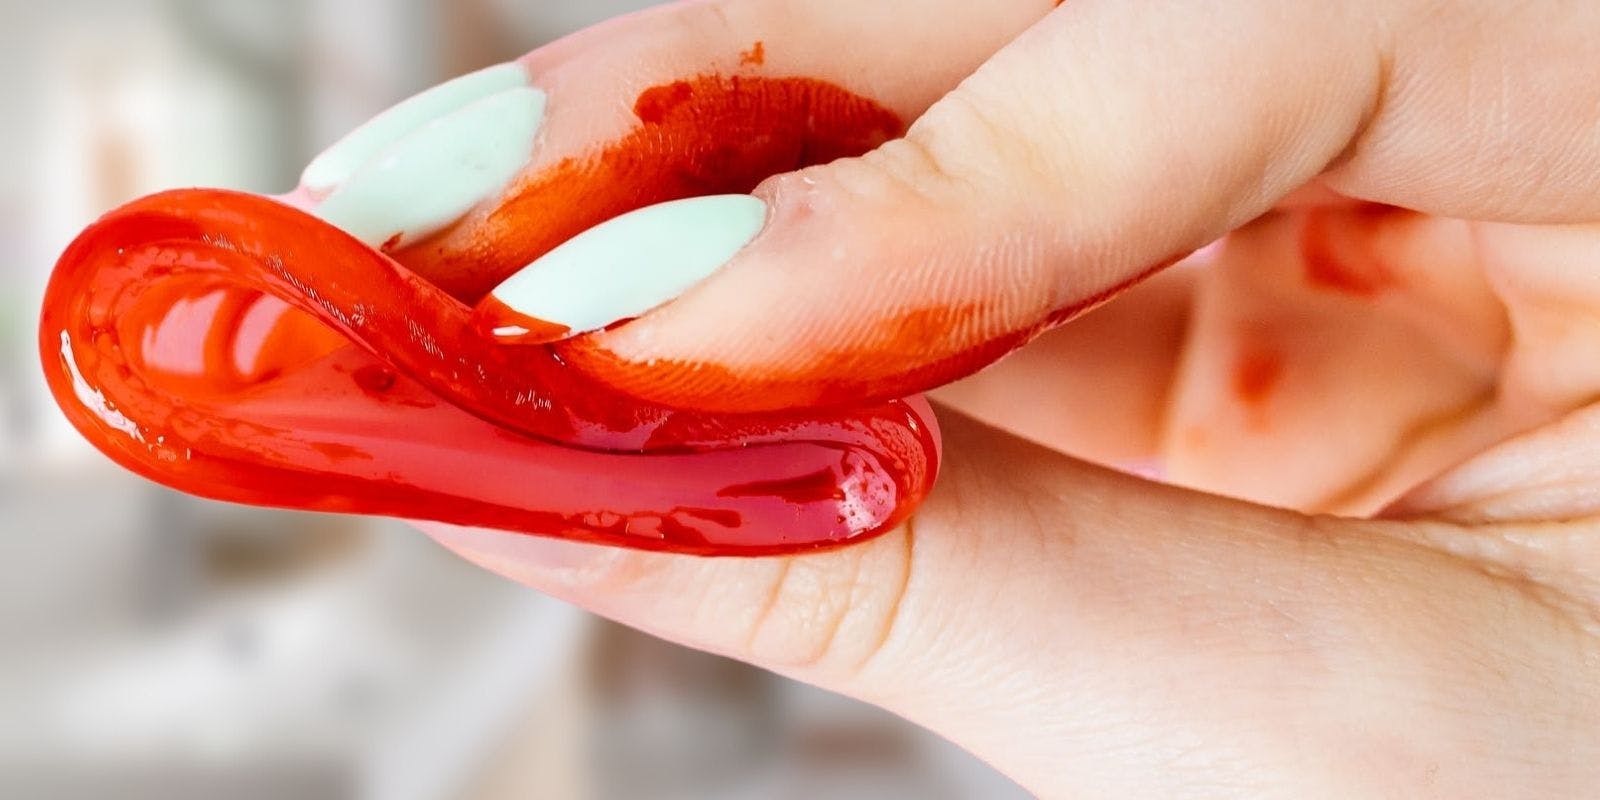 What are the reasons for having stringy period blood? - Quora